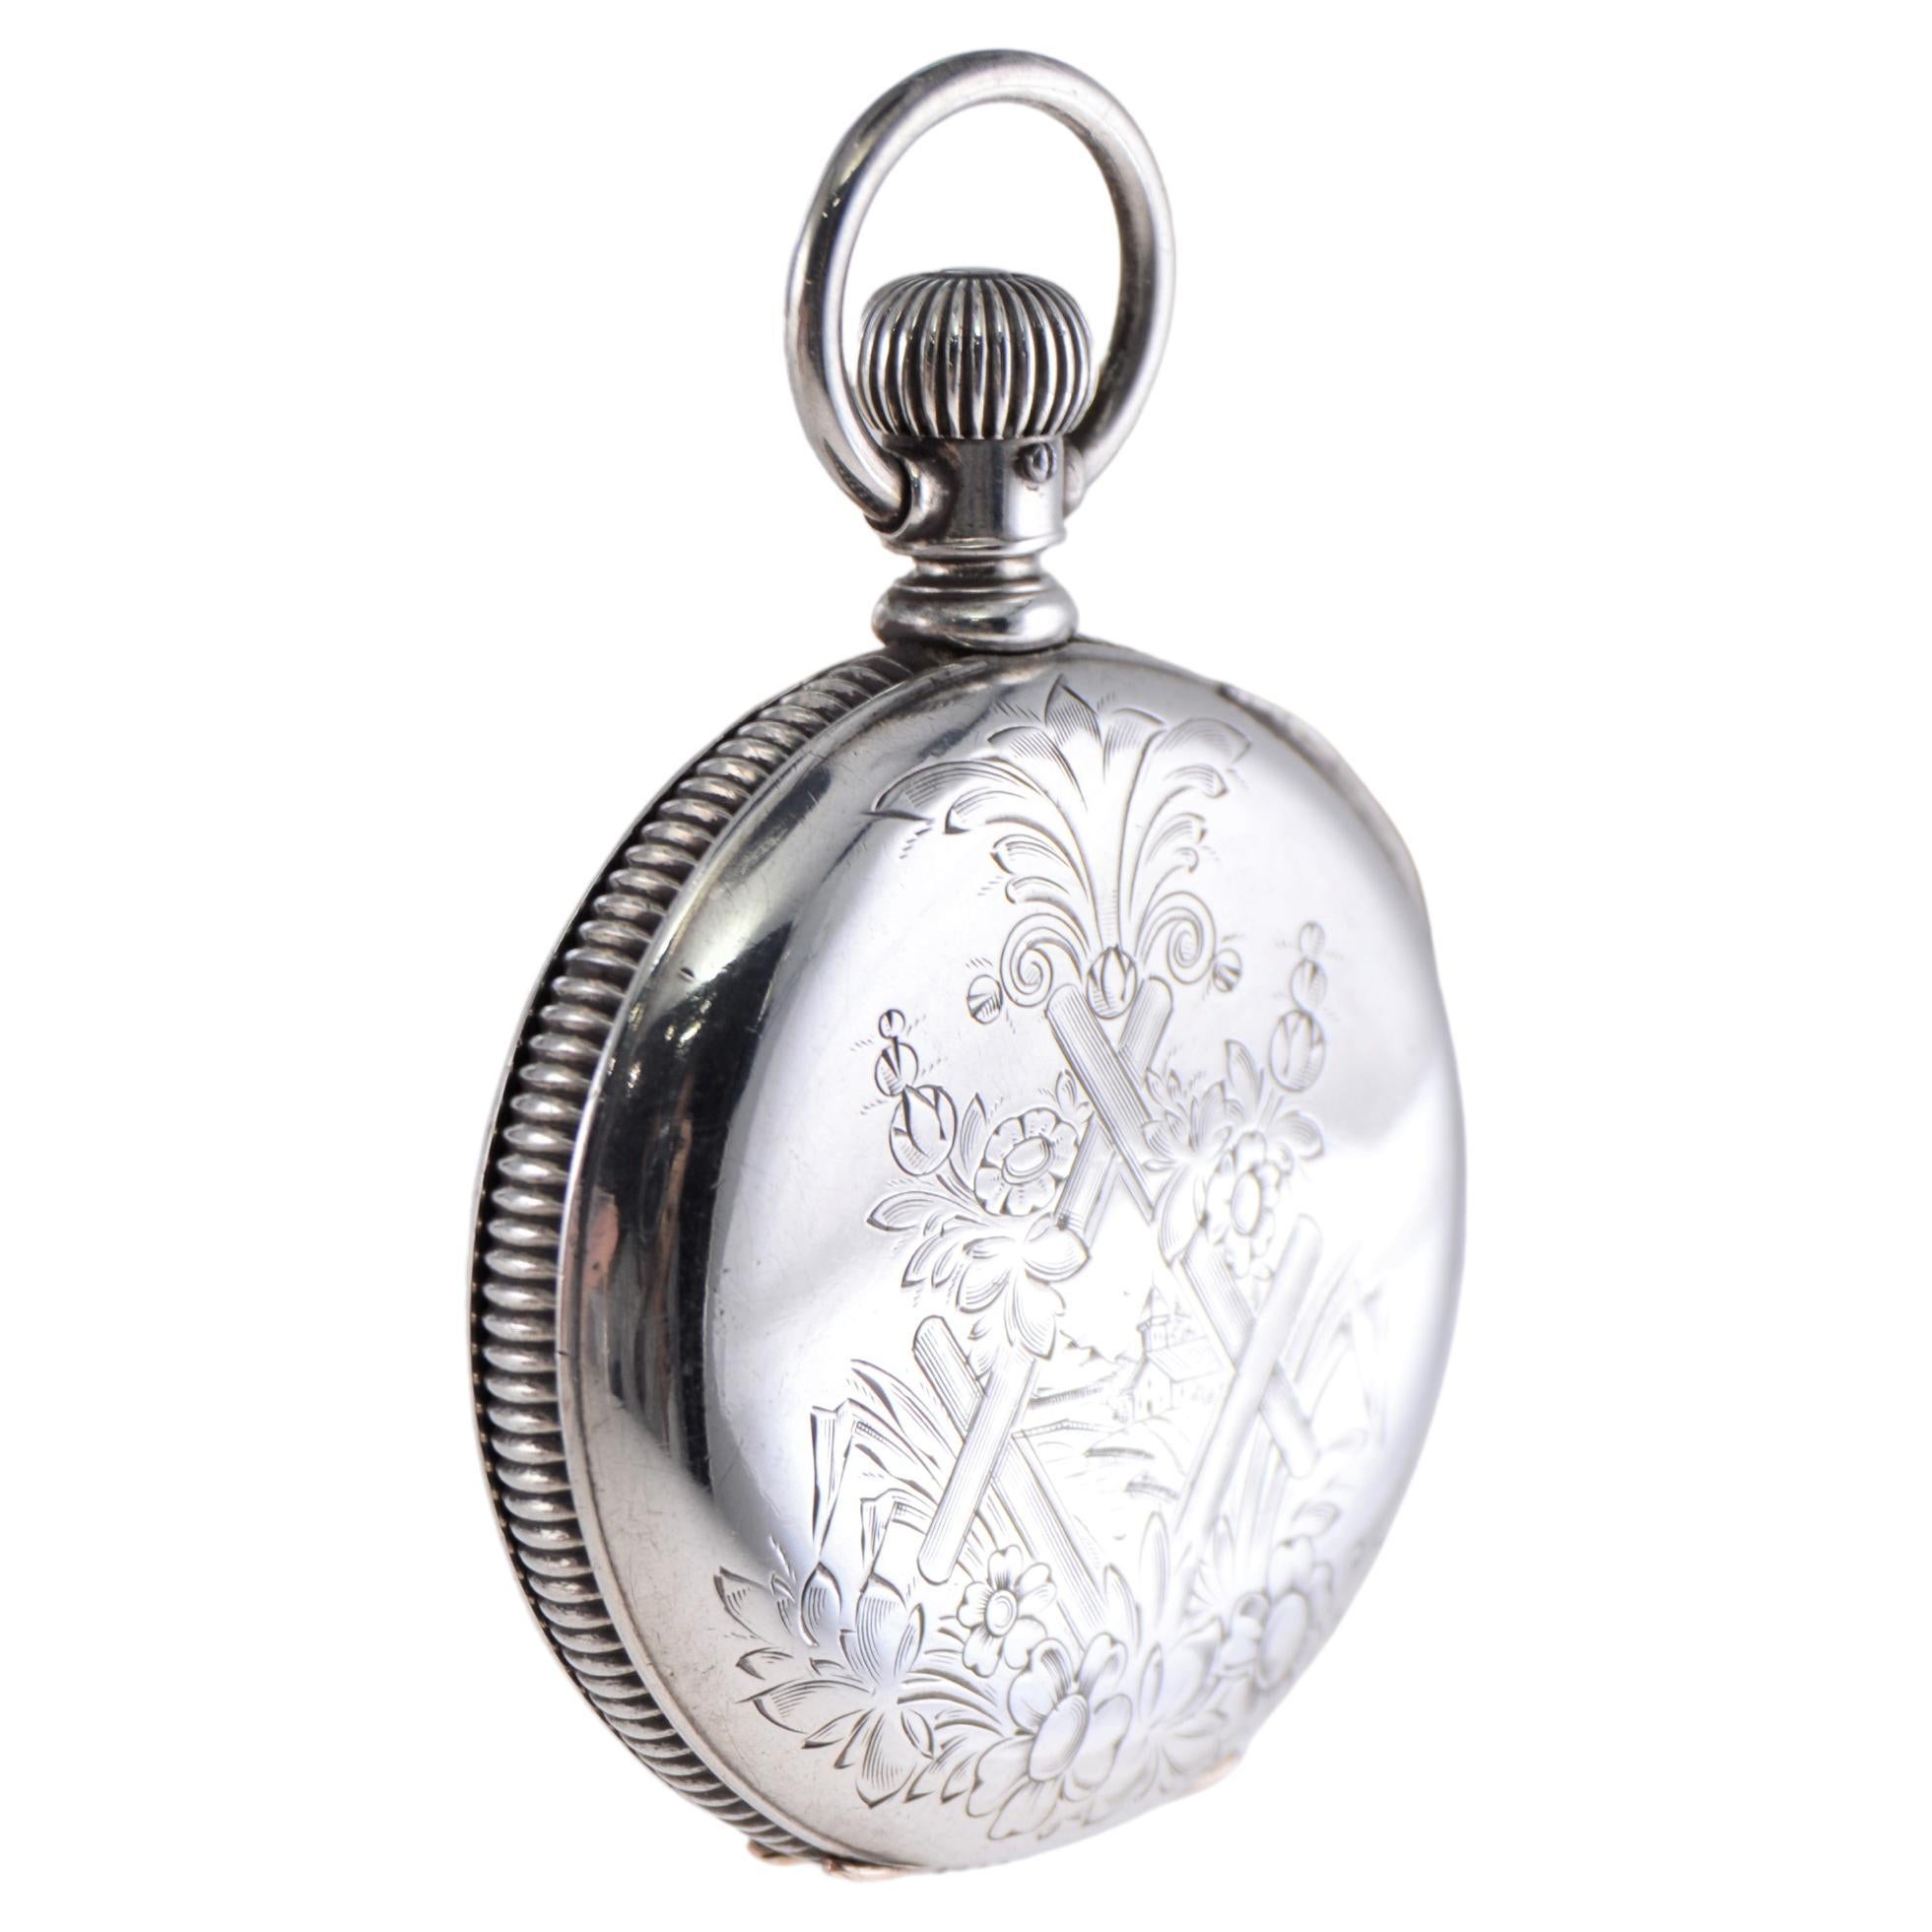 Illinois Silver Hunters Case Pocket Watch from 1893 with Pocket Watch Chain  For Sale 4